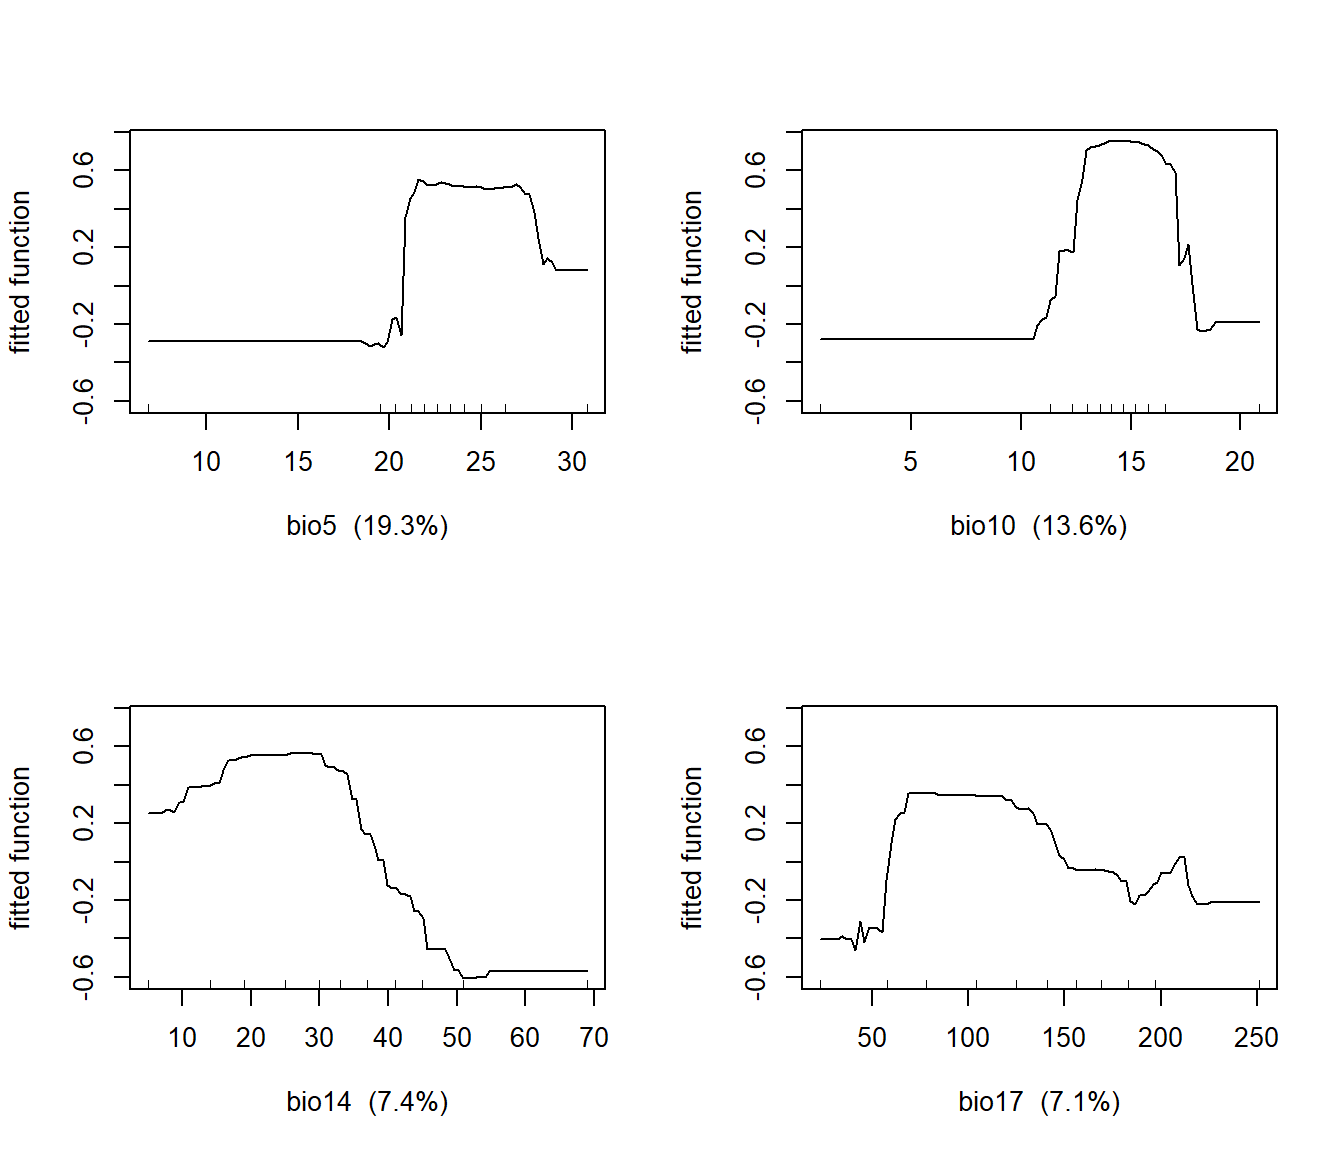 Partial regression plots showing the response of Douglas-fir to WorldClim bioclimatic indices in a boosted regression tree model.